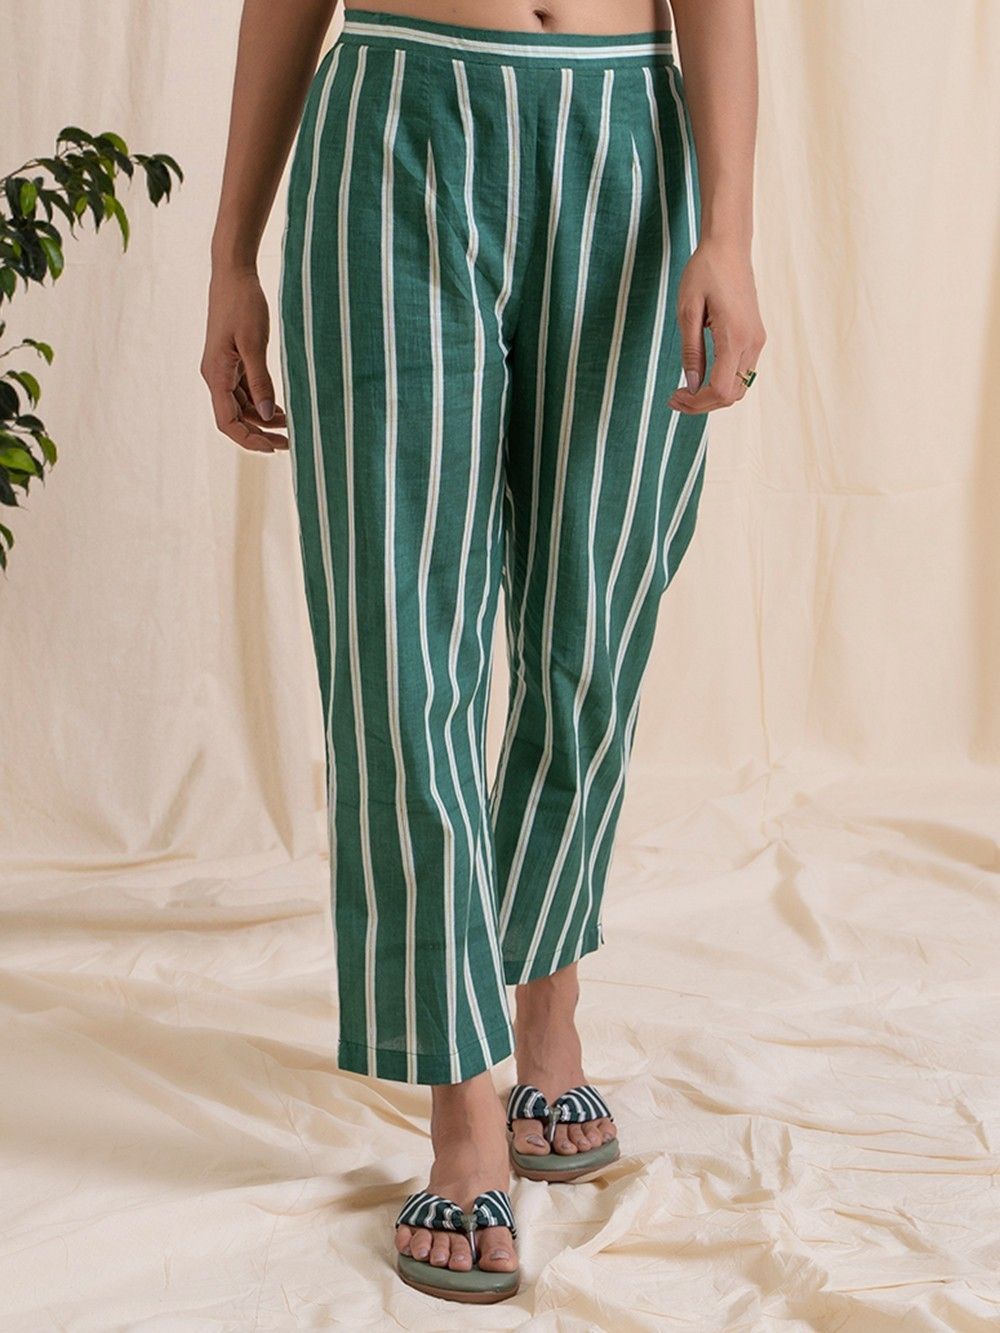 Discover 82+ green striped pants latest